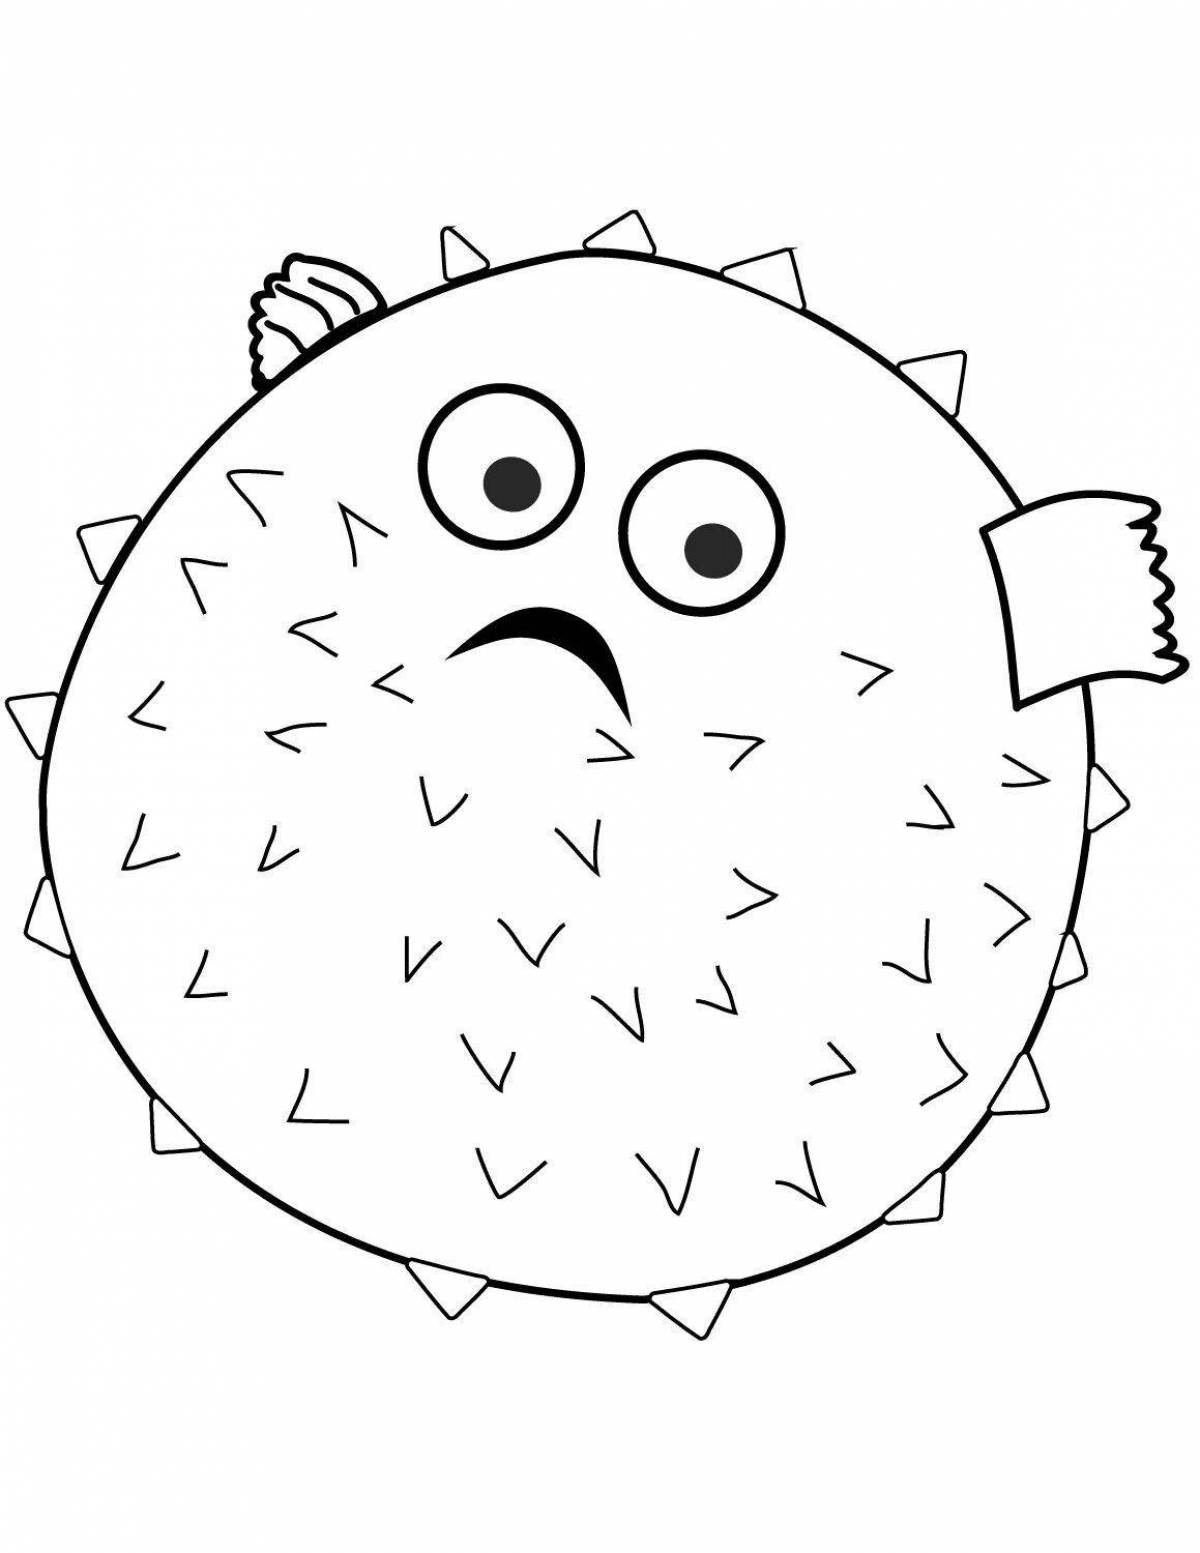 Glowing fish ball coloring page